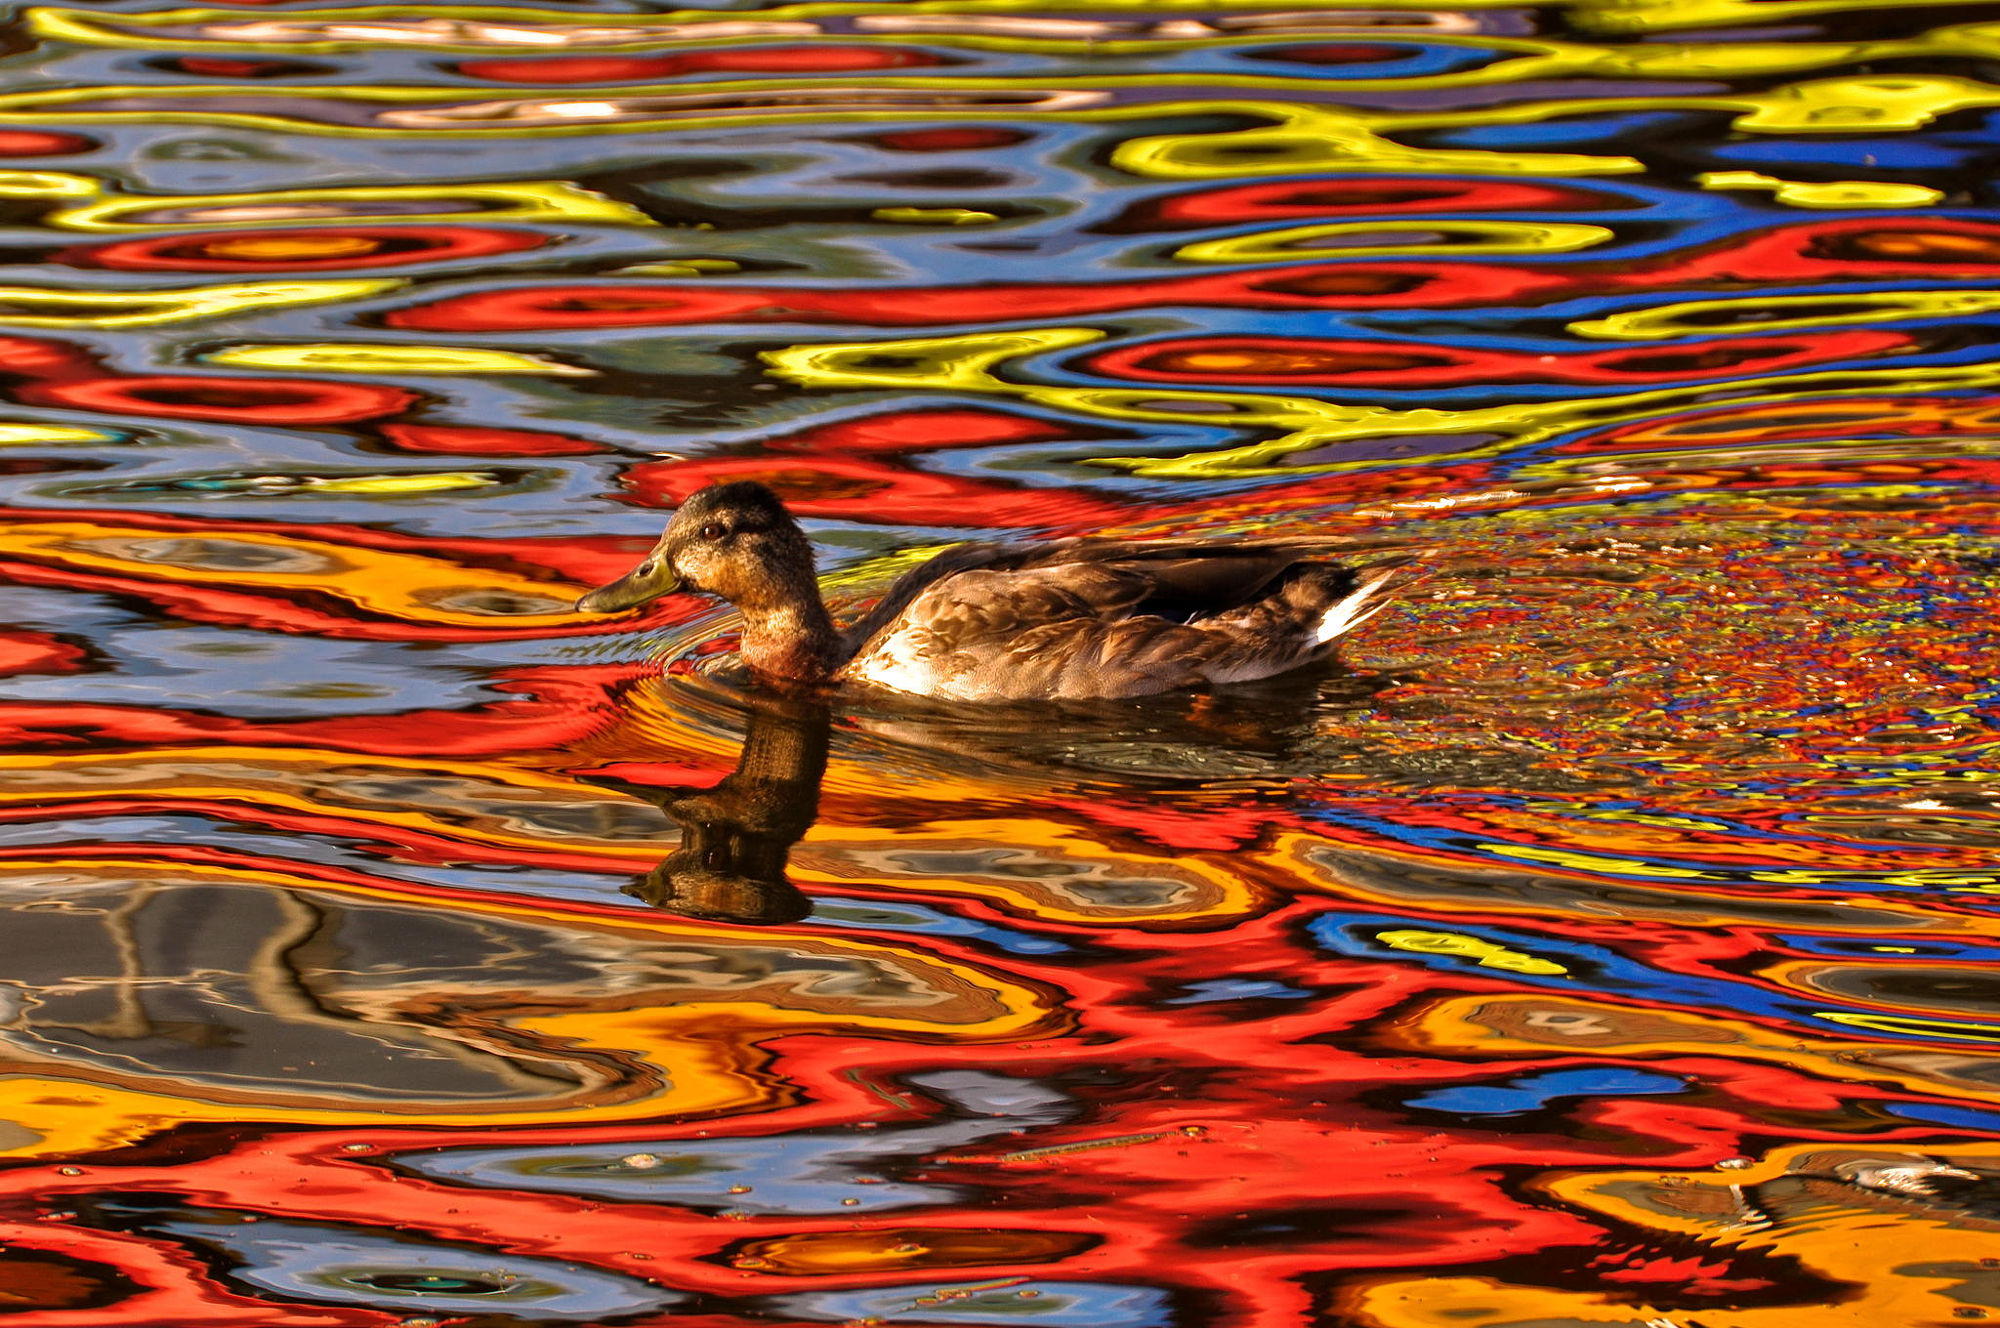 Psychedelic Trippy Colorful Duck Photo Manipulation 2000x1328